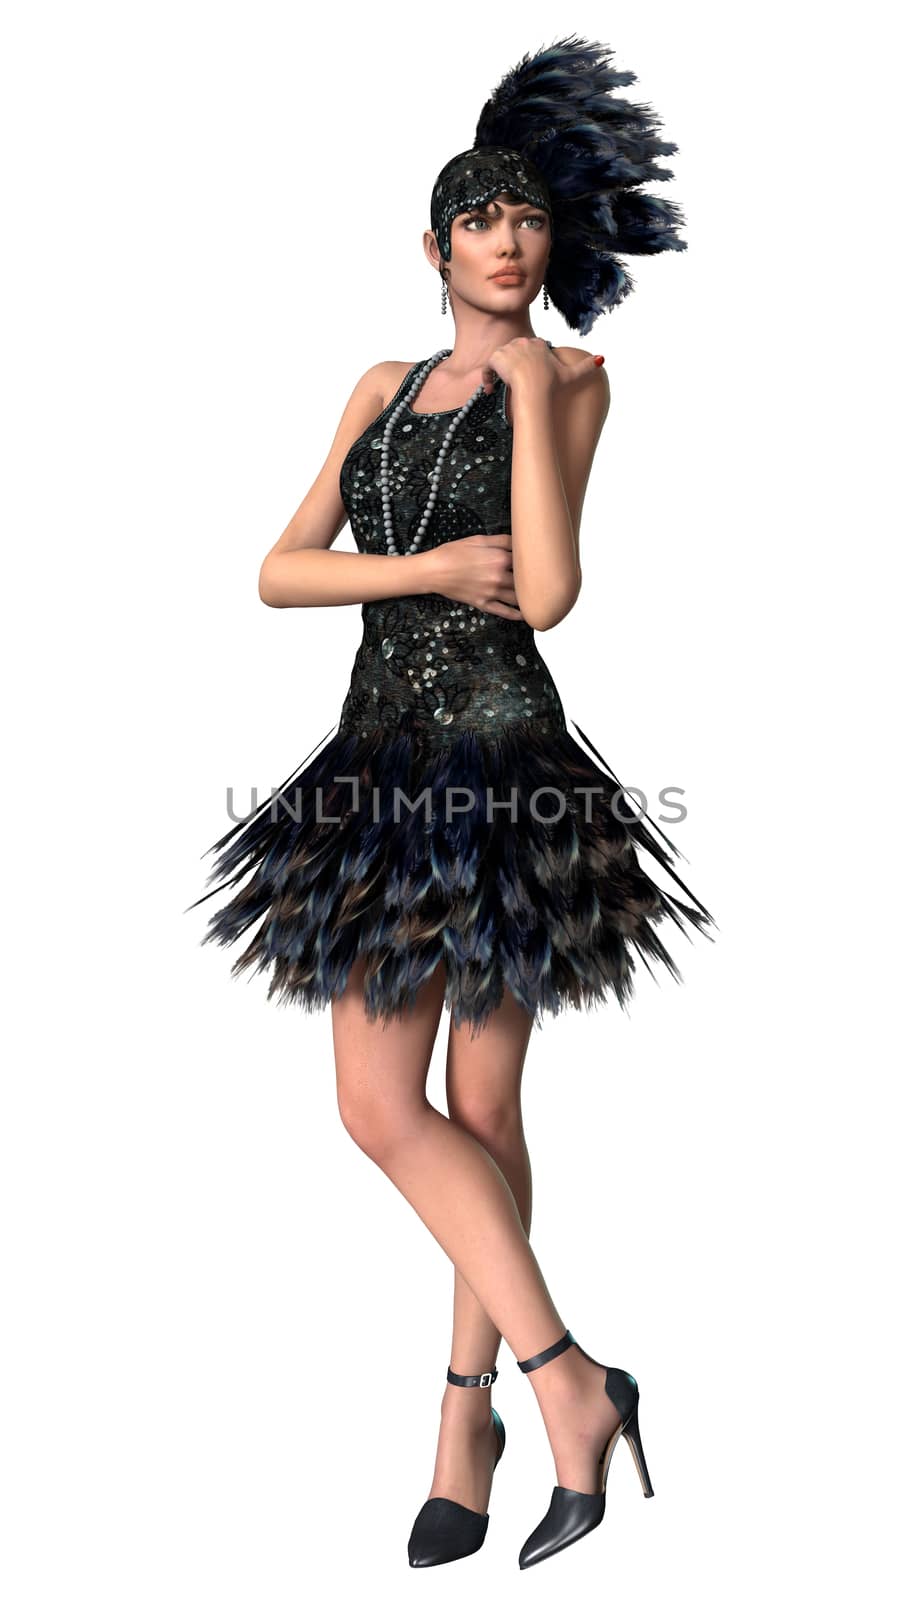 3D digital render of a beautiful vintage woman wearing 1920s style clothing isolated on white background